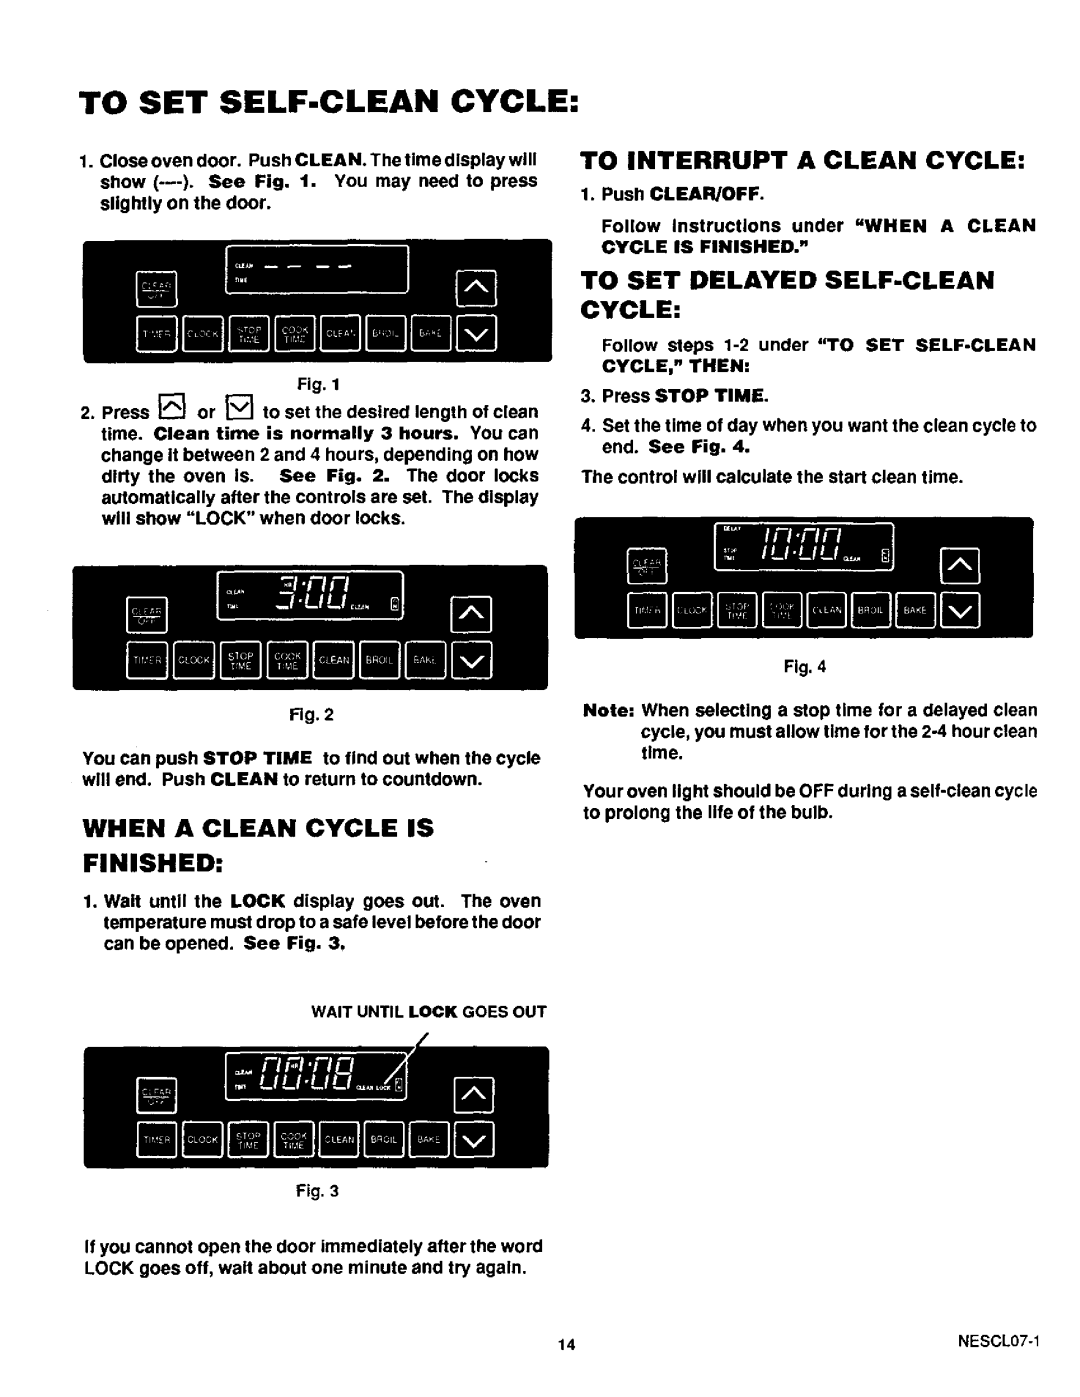 Sears 45520, 45521 warranty To Set Self-Cleancycle, To Interrupt A Clean Cycle, When A Clean Cycle Is Finished 